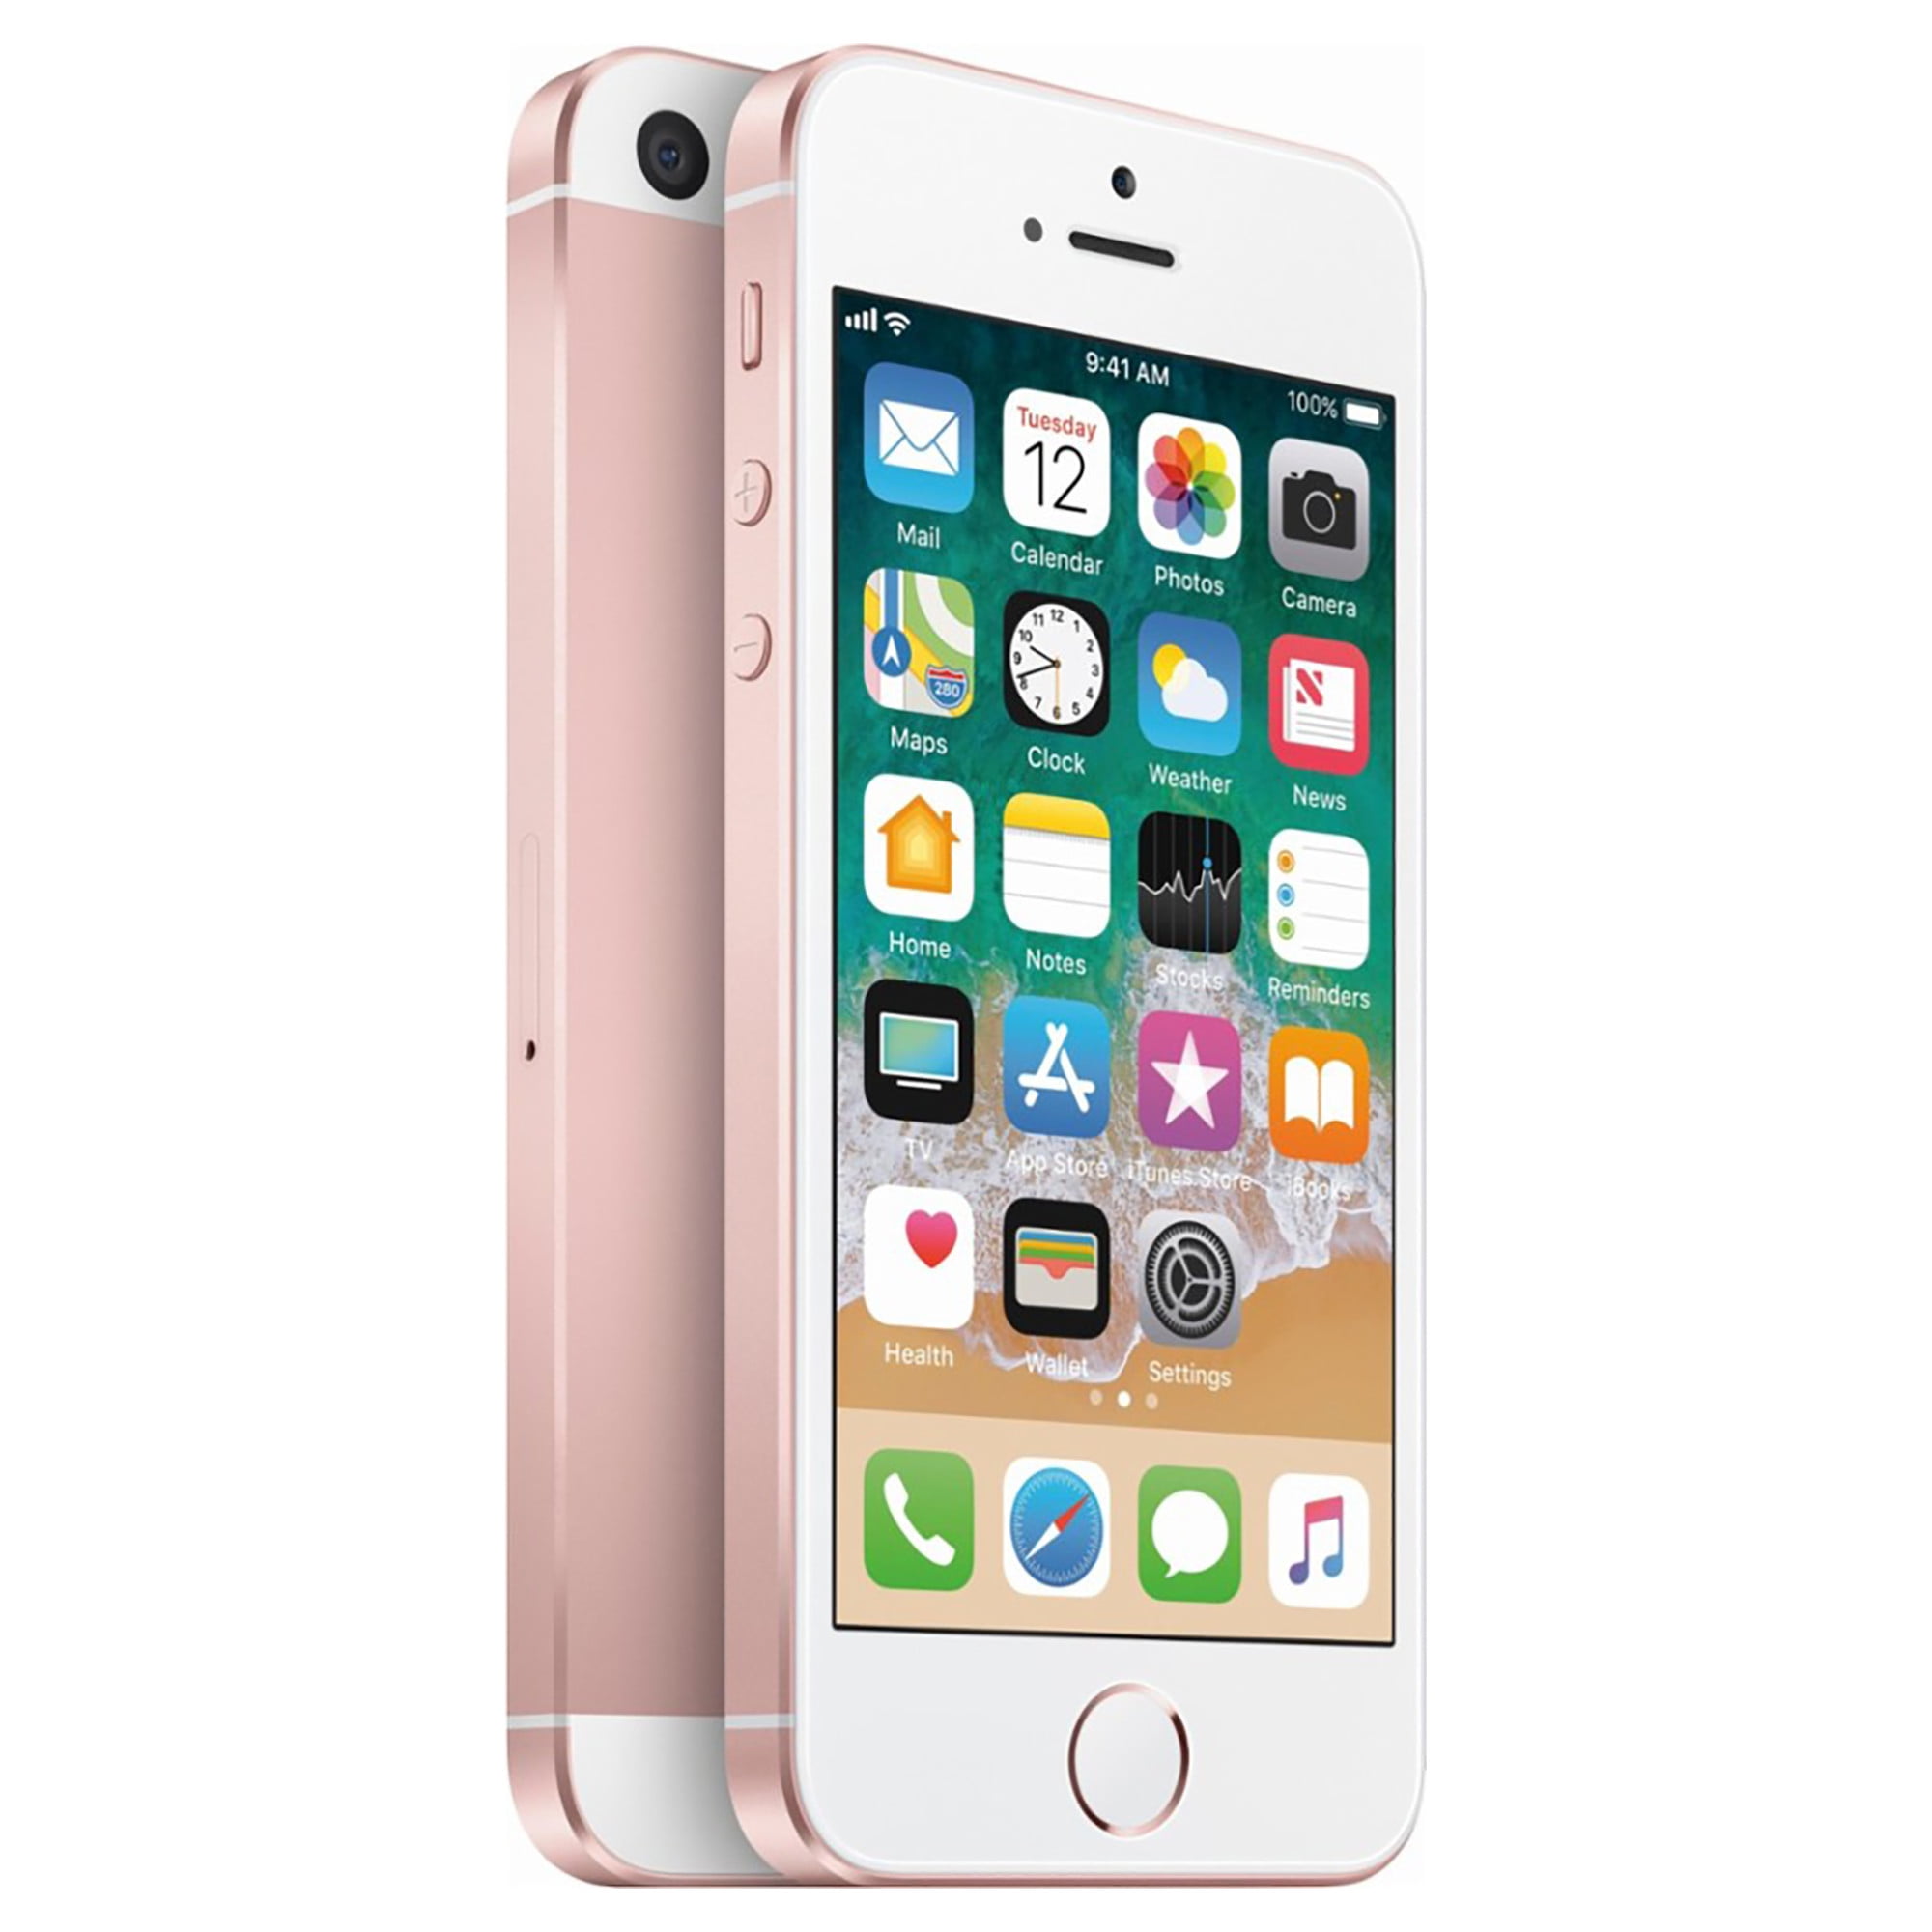 Restored Apple iPhone SE 128GB Unlocked GSM Phone with 12MP Camera - Rose  Gold (Refurbished)